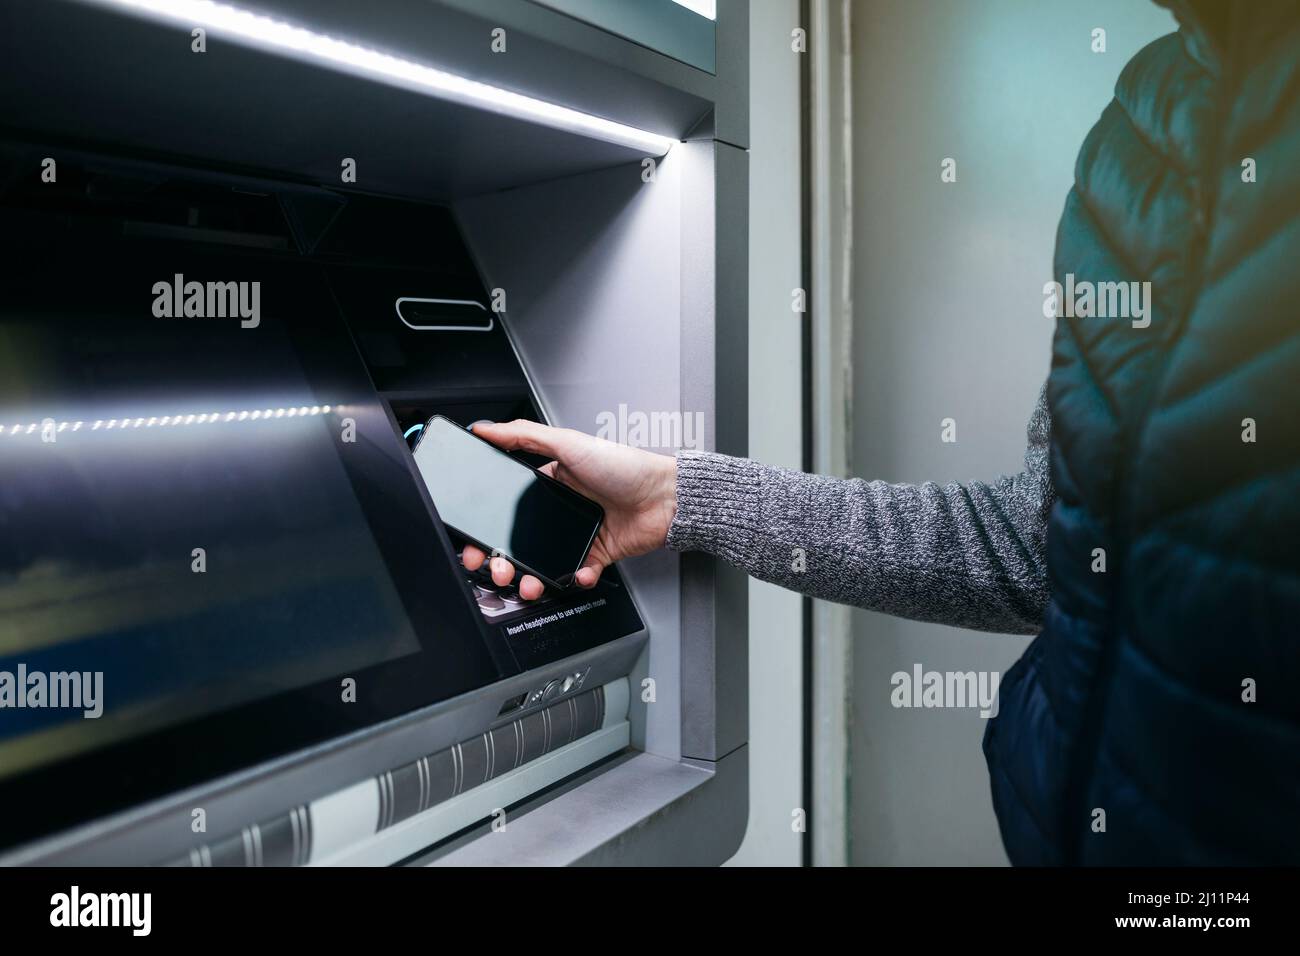 Man`s hand with an smartphone using an ATM street machine to withdraw some cash Stock Photo